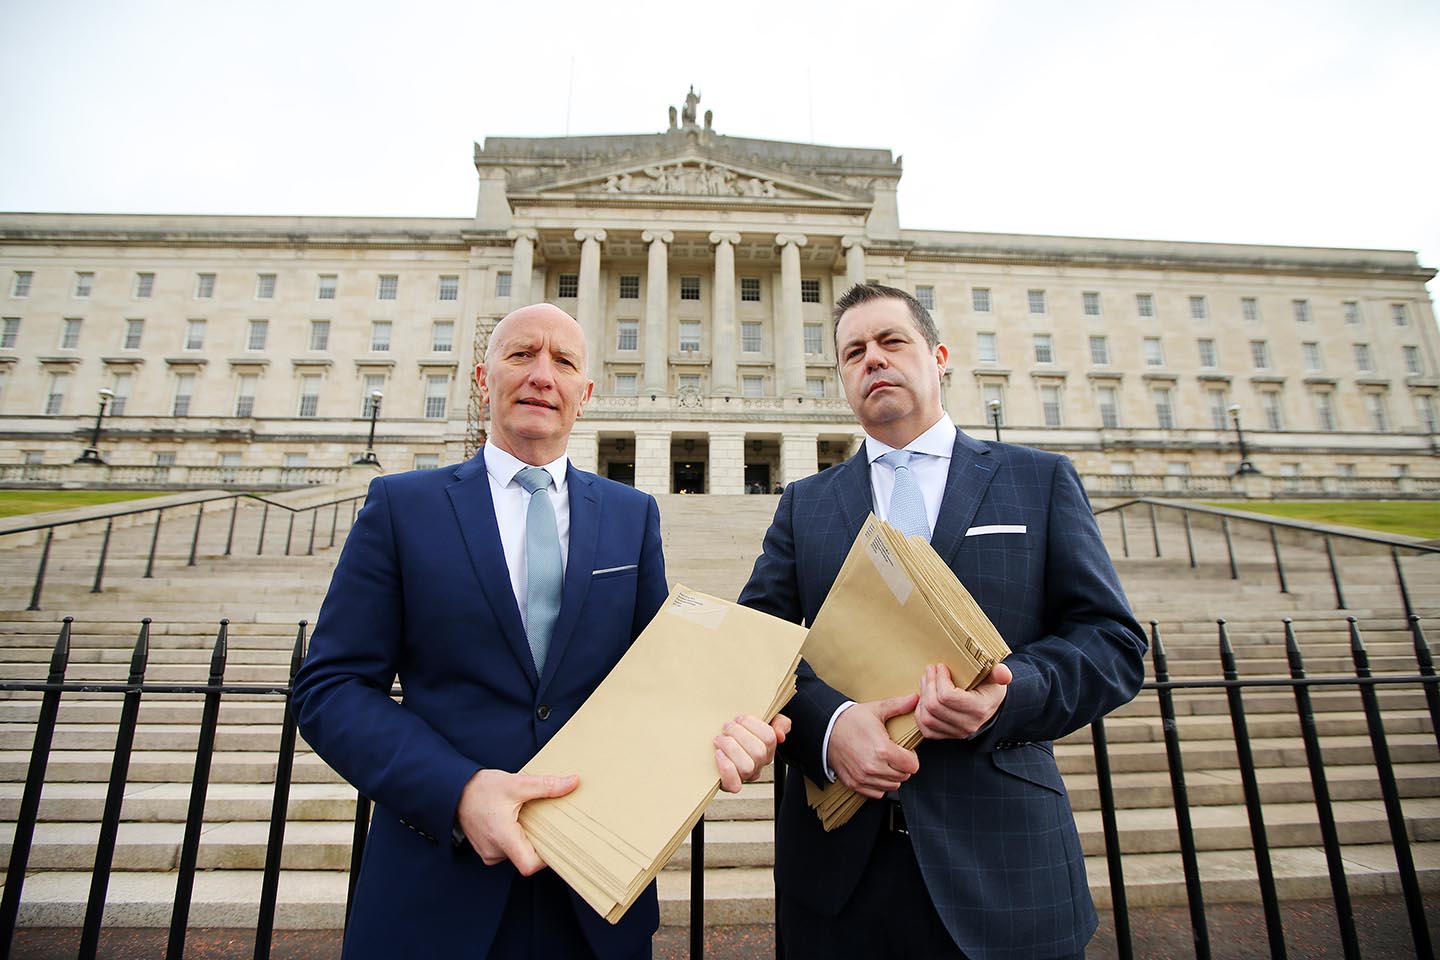 Hospitality Ulster join Business and Civic Society in an appeal to restore Devolved Government